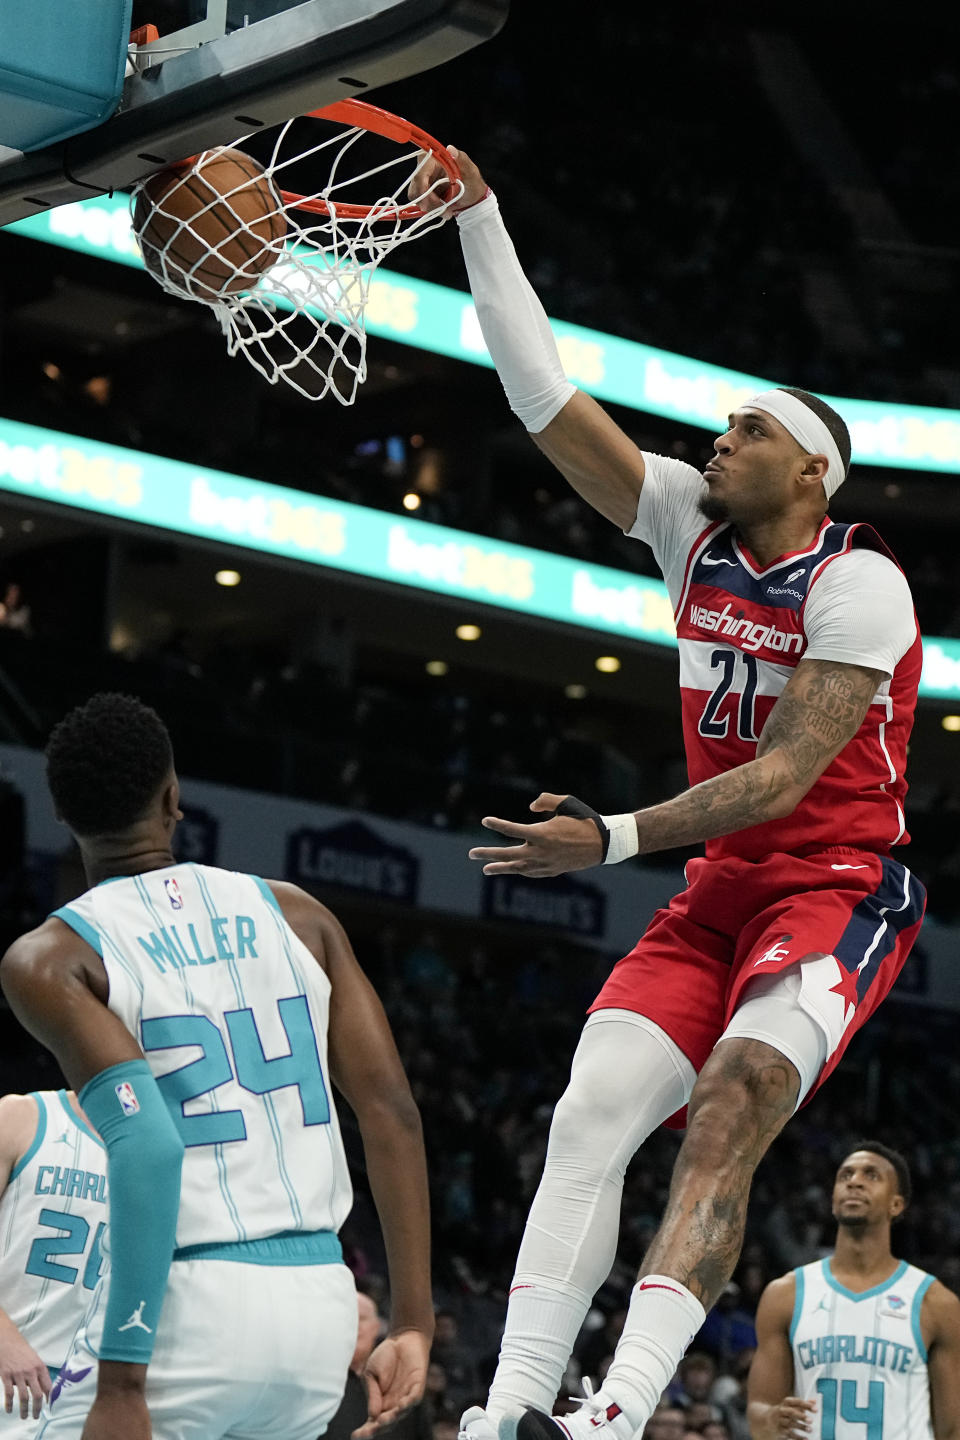 Washington Wizards center Daniel Gafford scores as Charlotte Hornets forward Brandon Miller looks on during the first half of an NBA basketball game on Wednesday, Nov. 22, 2023, in Charlotte, N.C. (AP Photo/Chris Carlson)